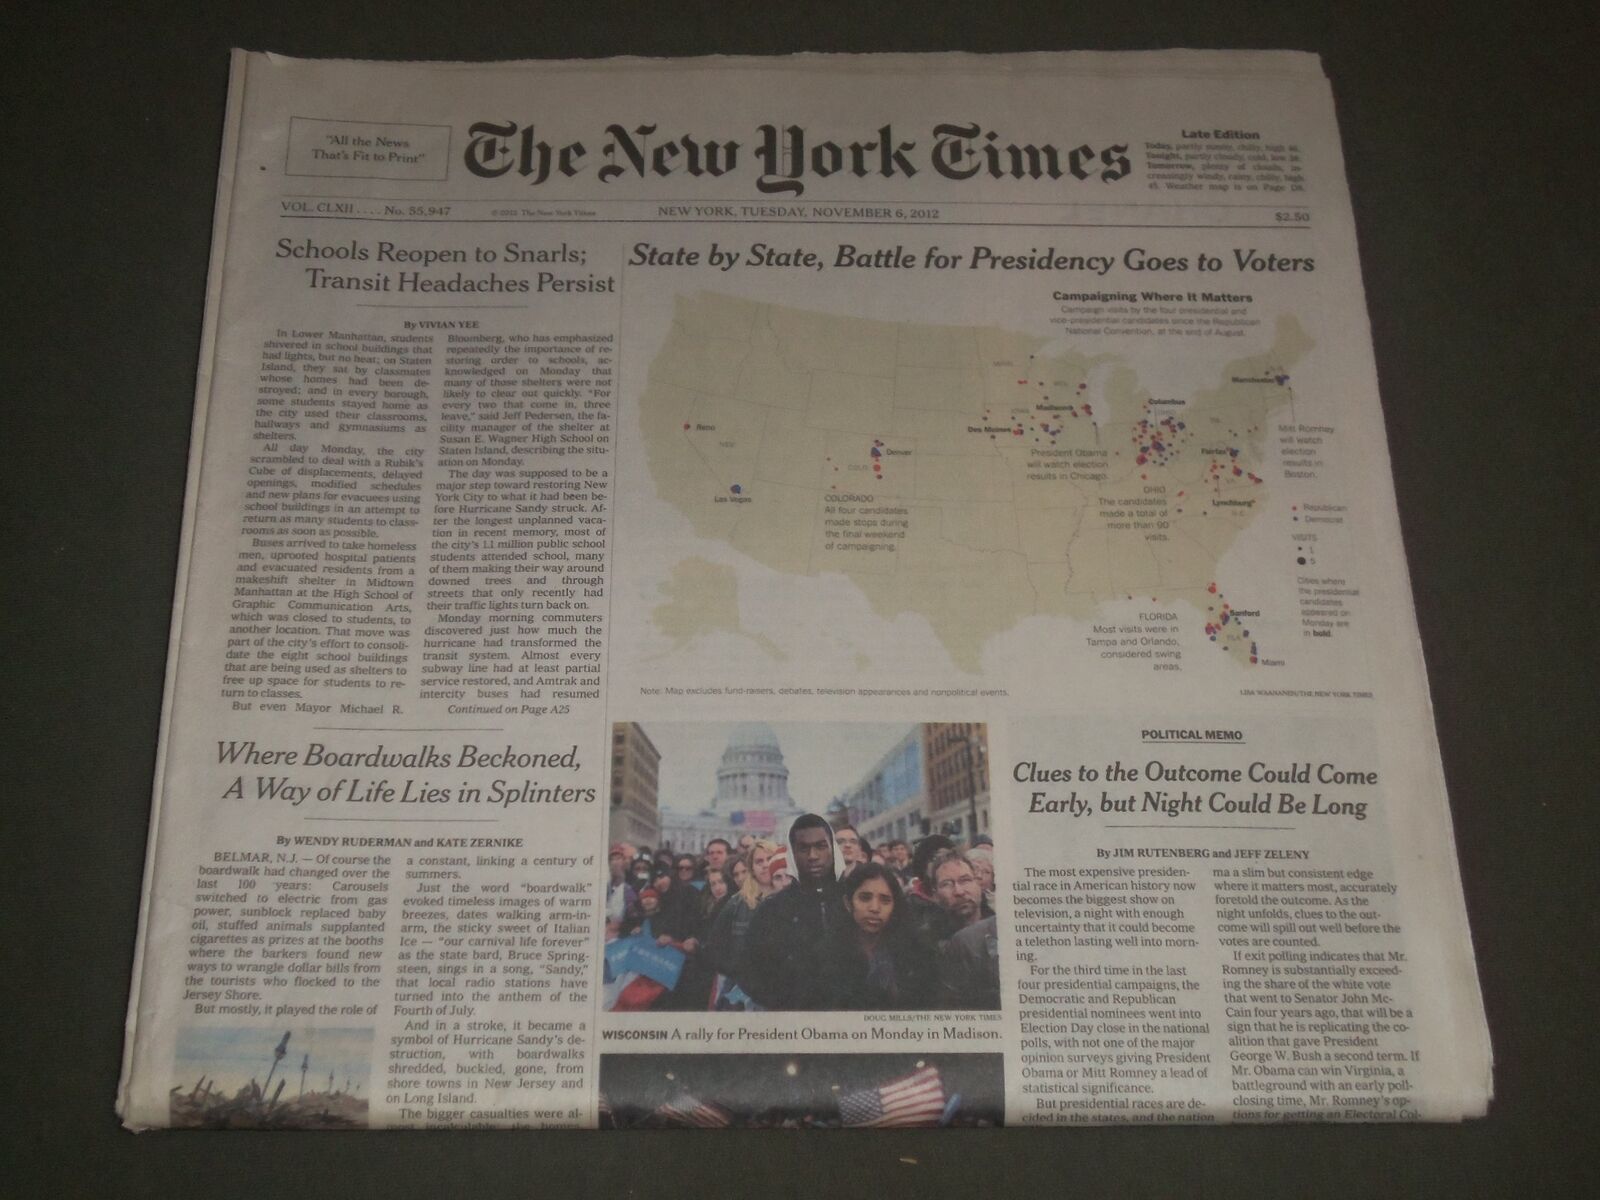 2012 NOV 6 NEW YORK TIMES - STATE BY STATE BATTLE FOR PRESIDENCY - NP 2732